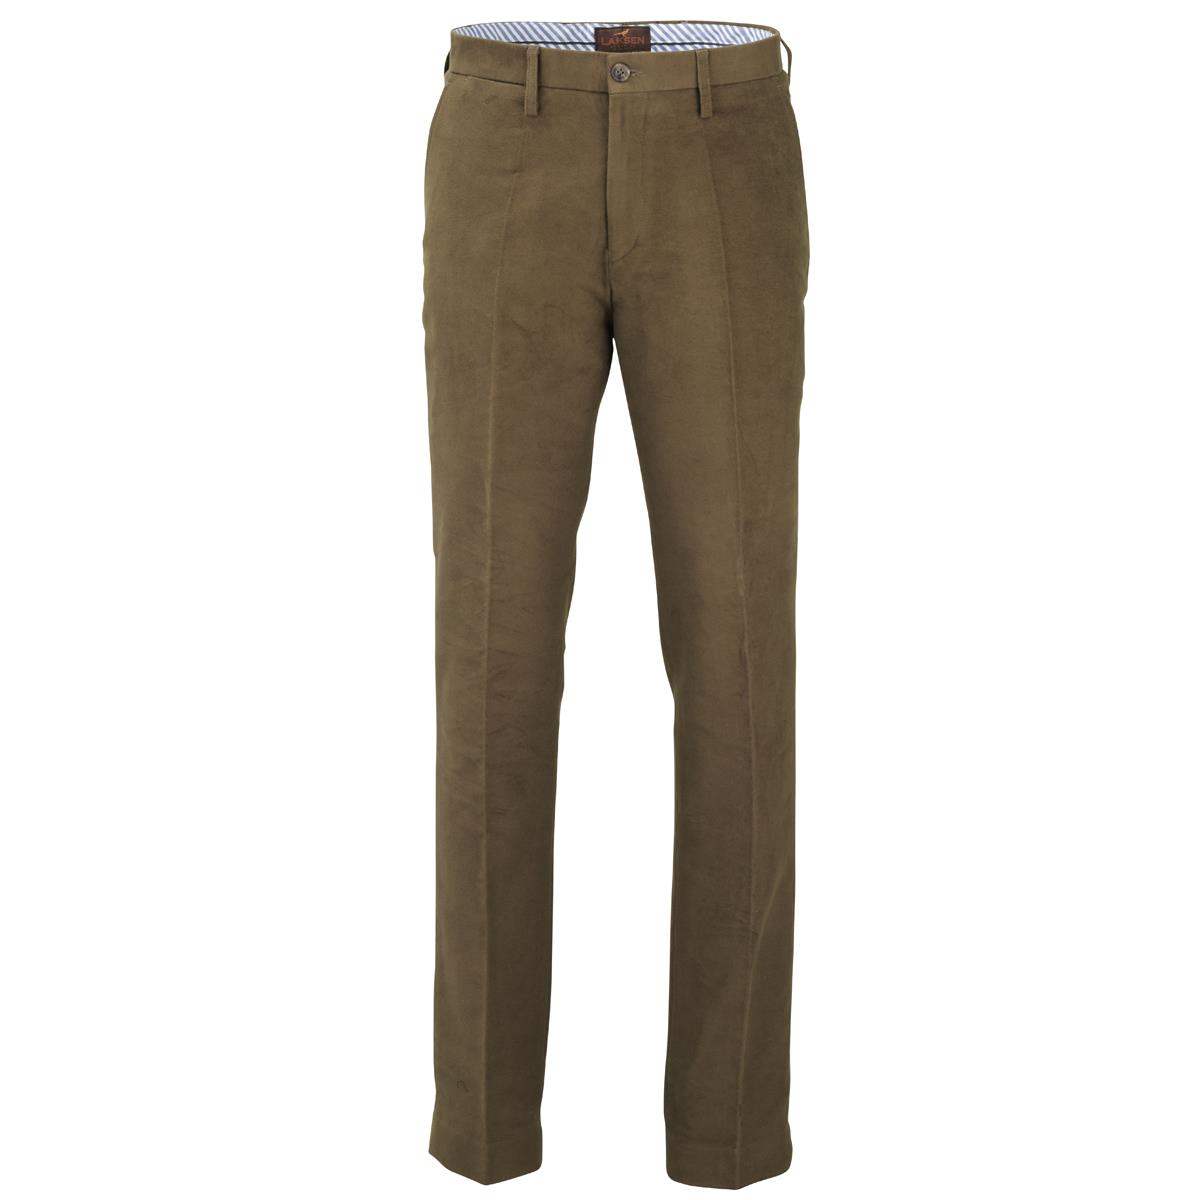 What is the ounce weight of the cotton used in Laksen Men's Broadlands Trousers?